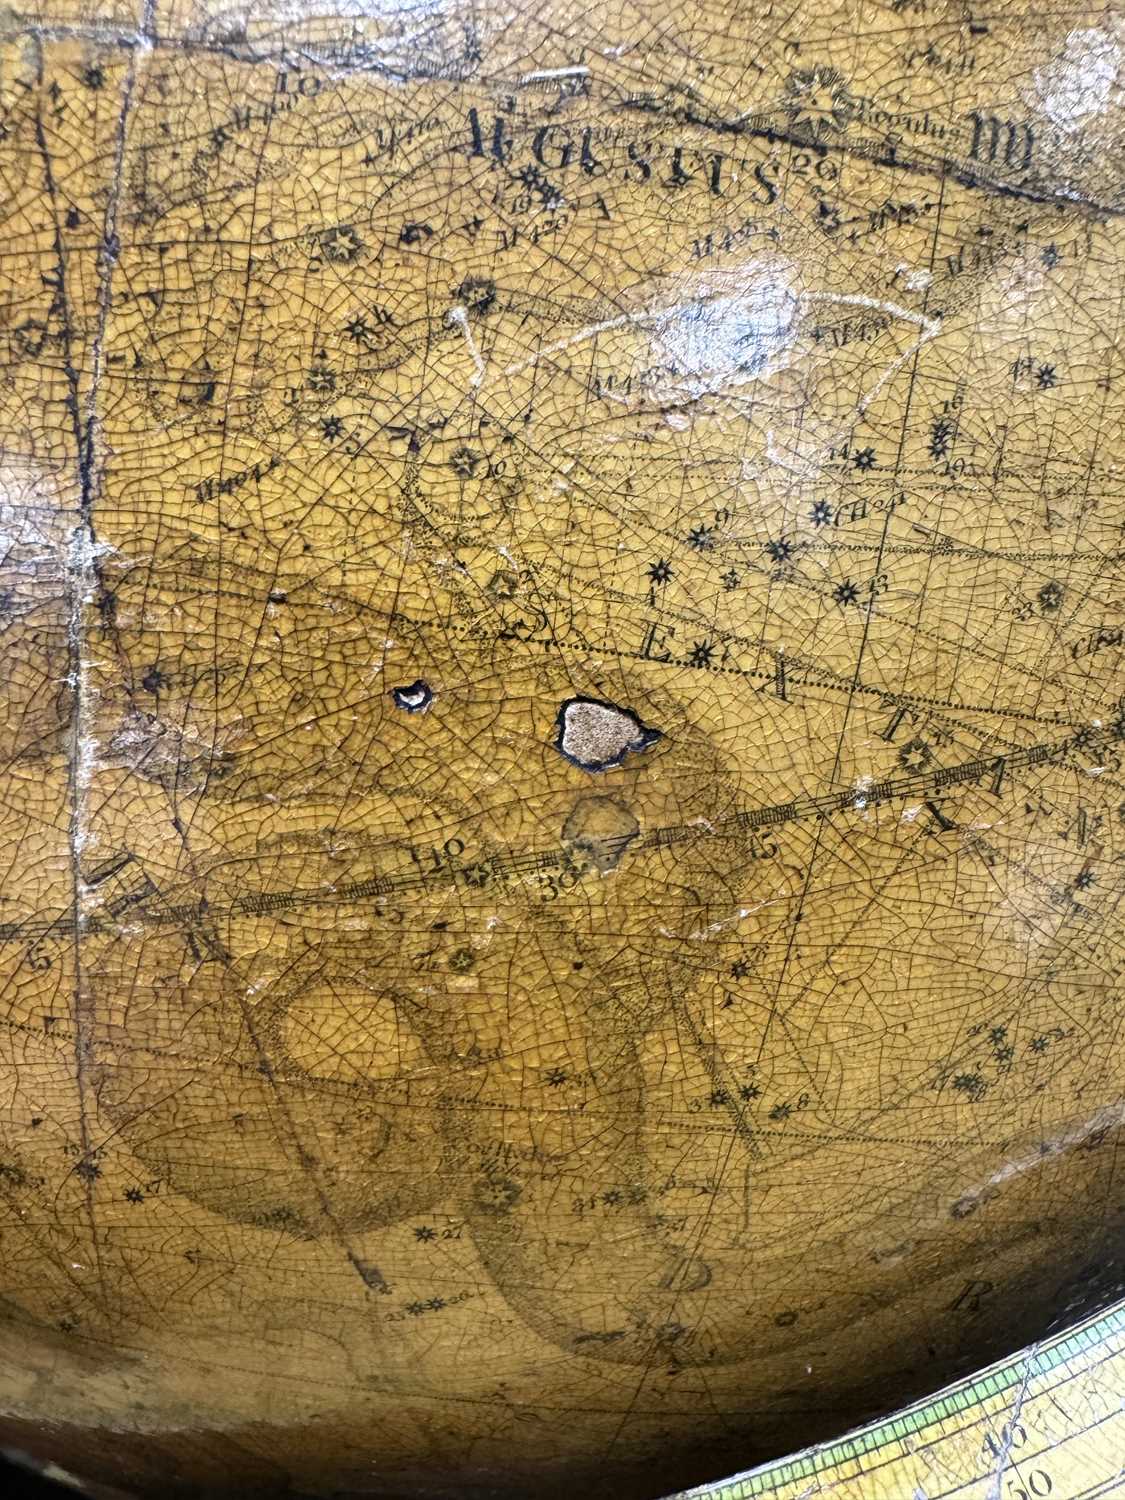 A 19TH CENTURY 15” CARY CELESTIAL LIBRARY GLOBE - Image 9 of 14